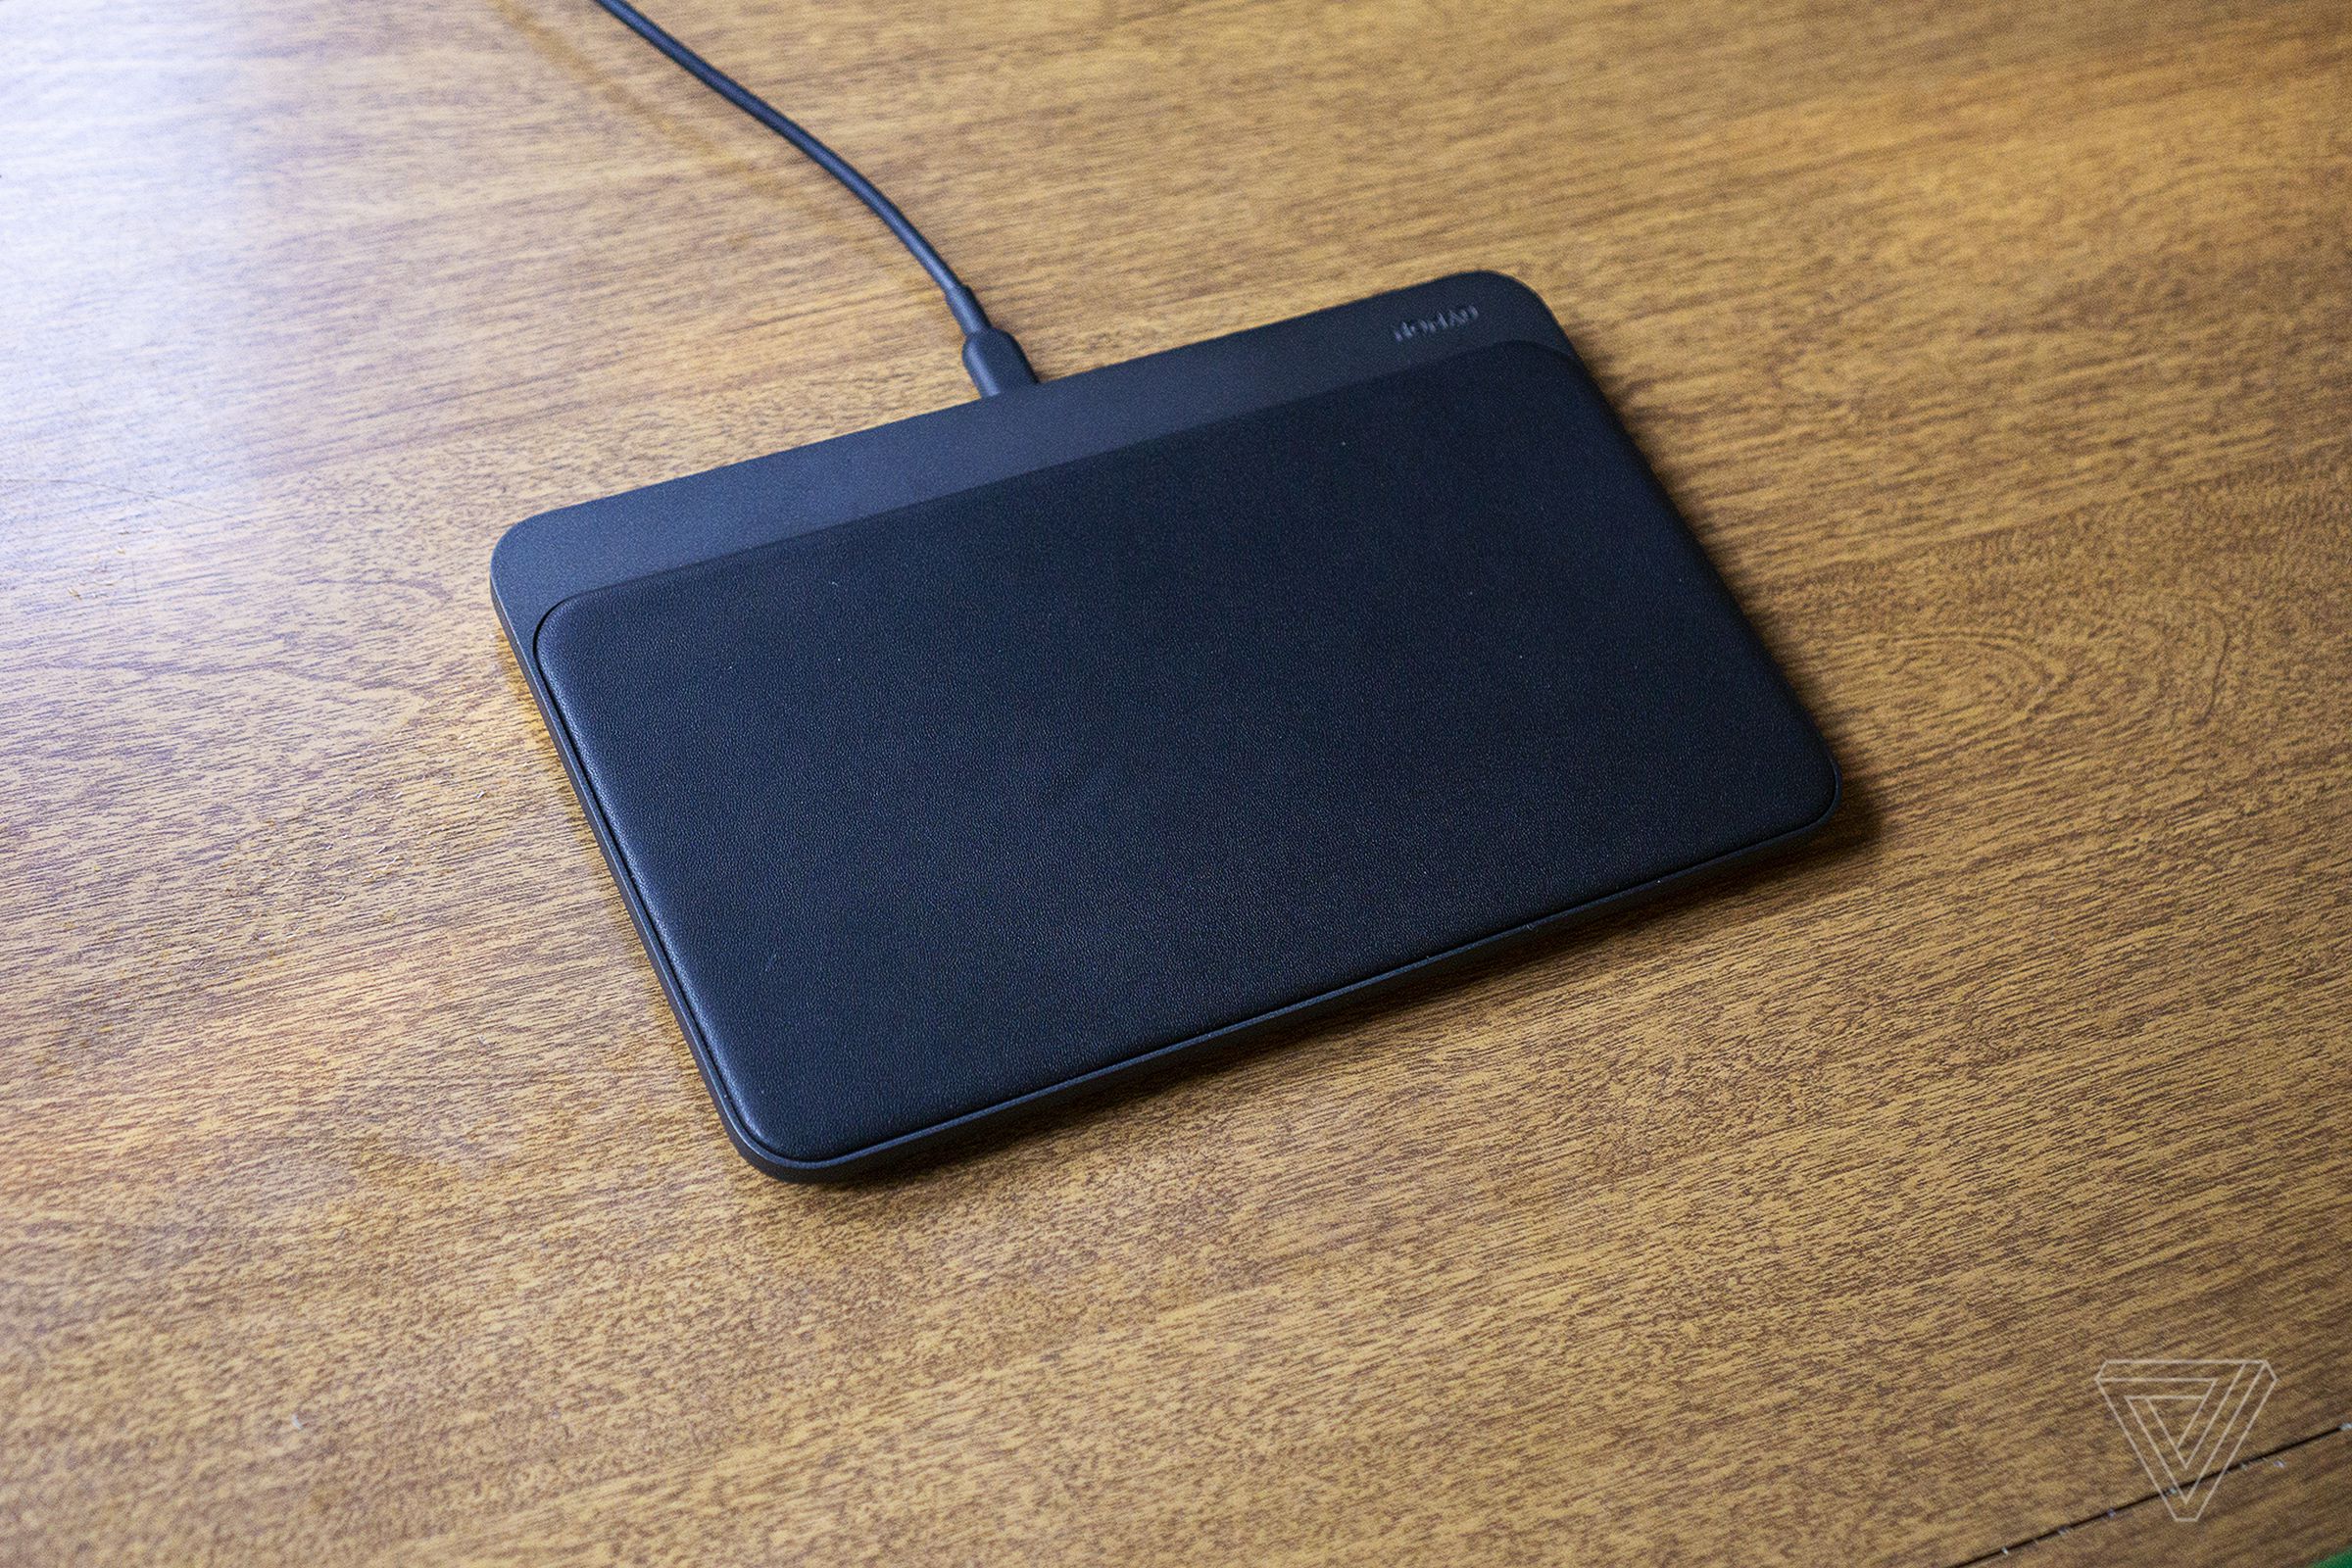 The leather and aluminum charger is unobtrusive on a nightstand or desk